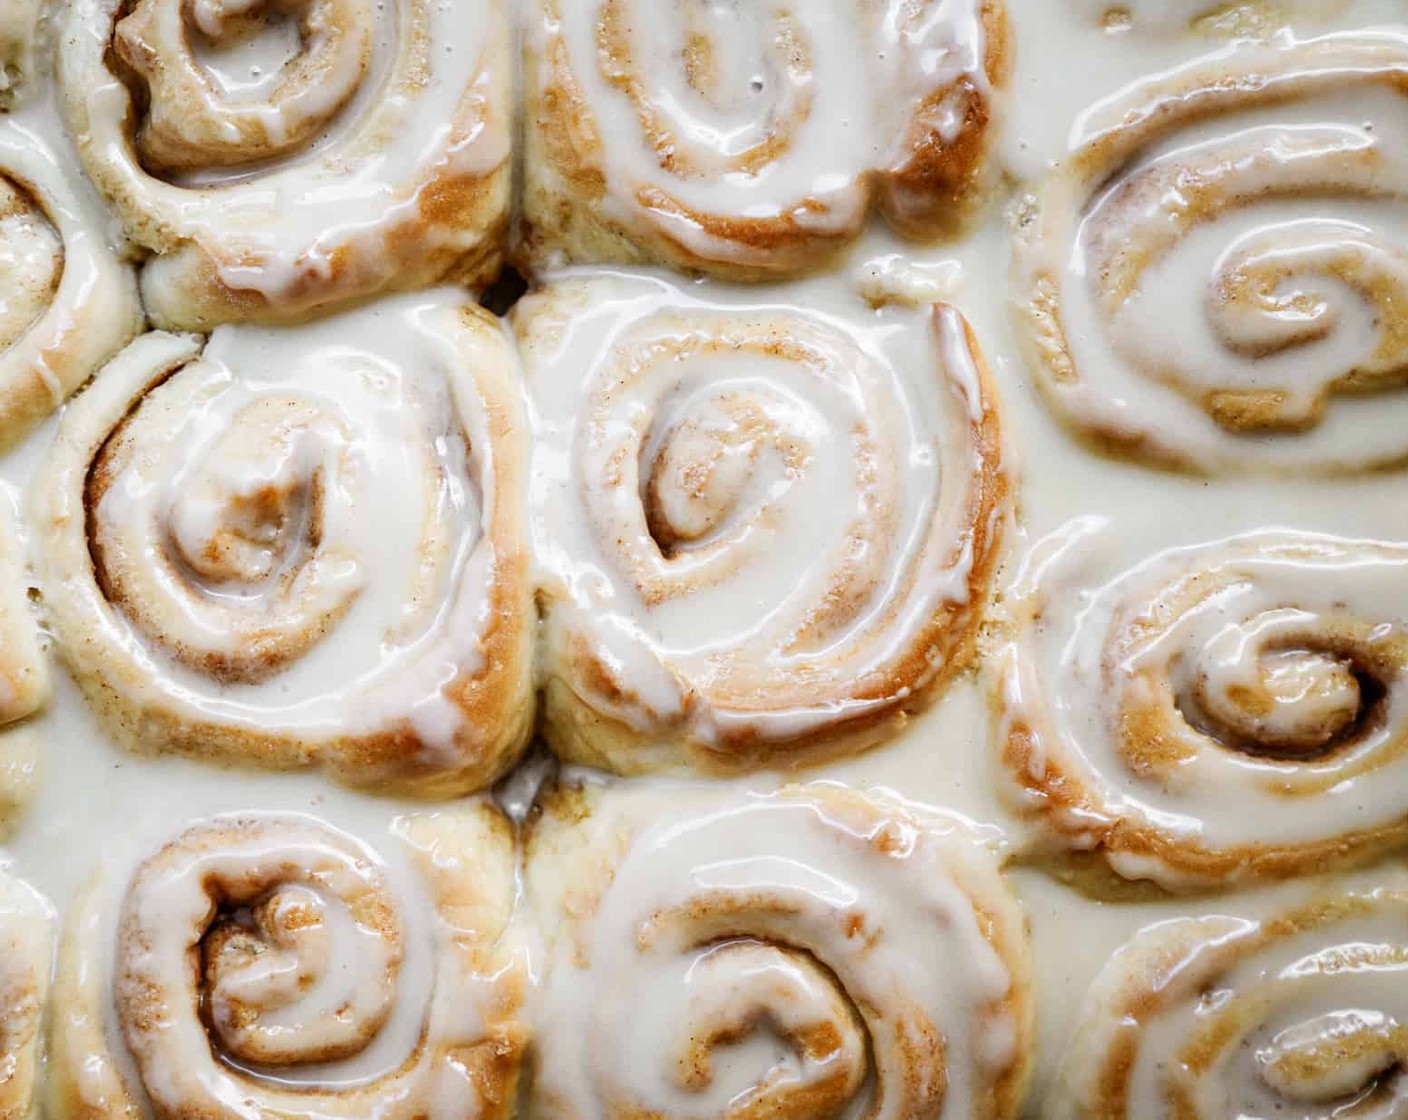 step 15 Once your cinnamon buns are ready then spread over the icing and enjoy these babies hot! They last for one week in a tightly sealed container, keep at room temperature.